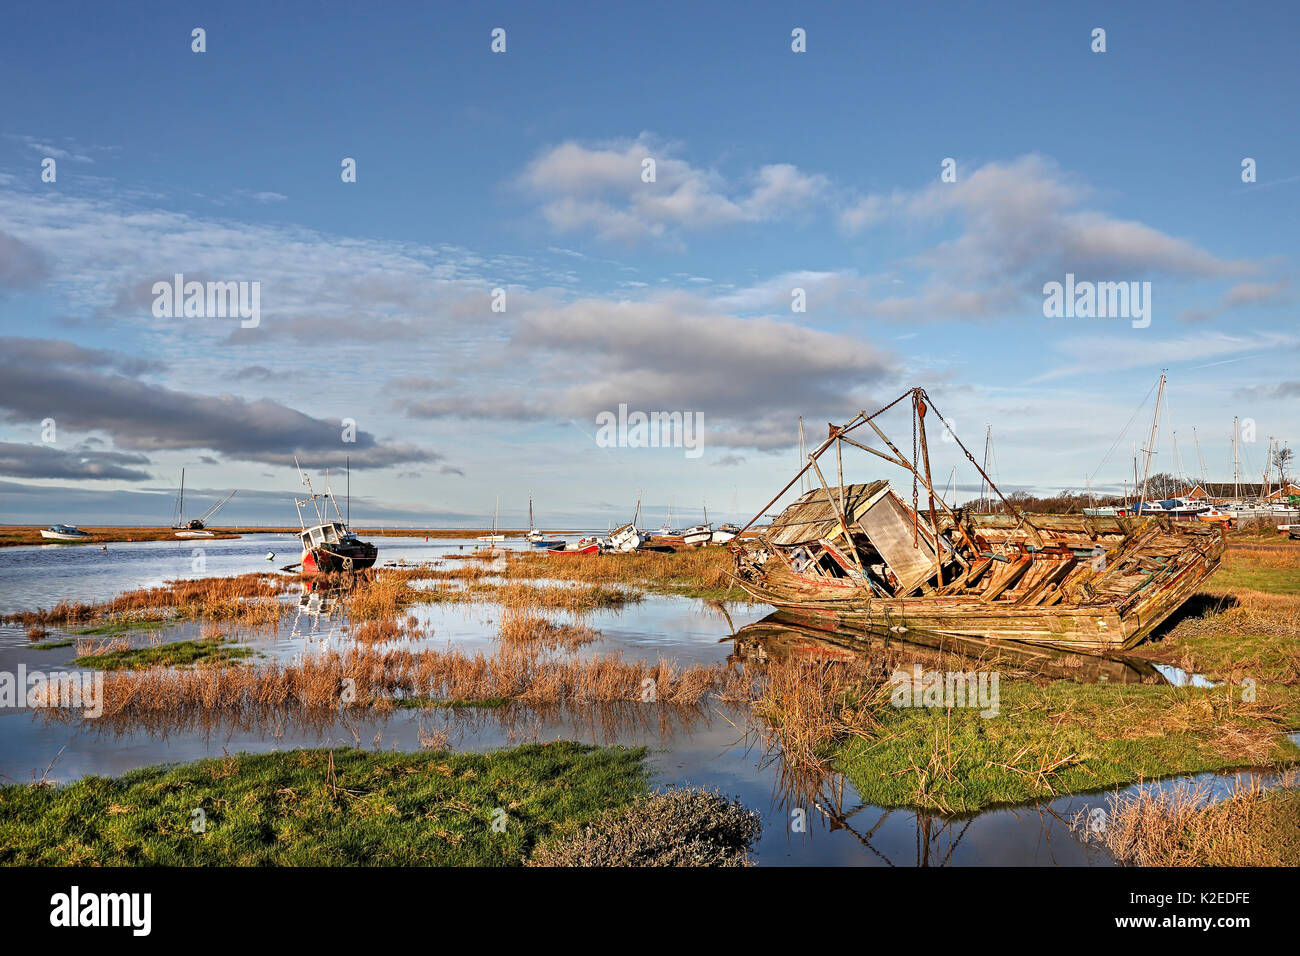 Old boats alongside channel with rising tide in Dee Estuary in early morning sunlight. Heswall, Wirral, Merseyside, UK January. Stock Photo